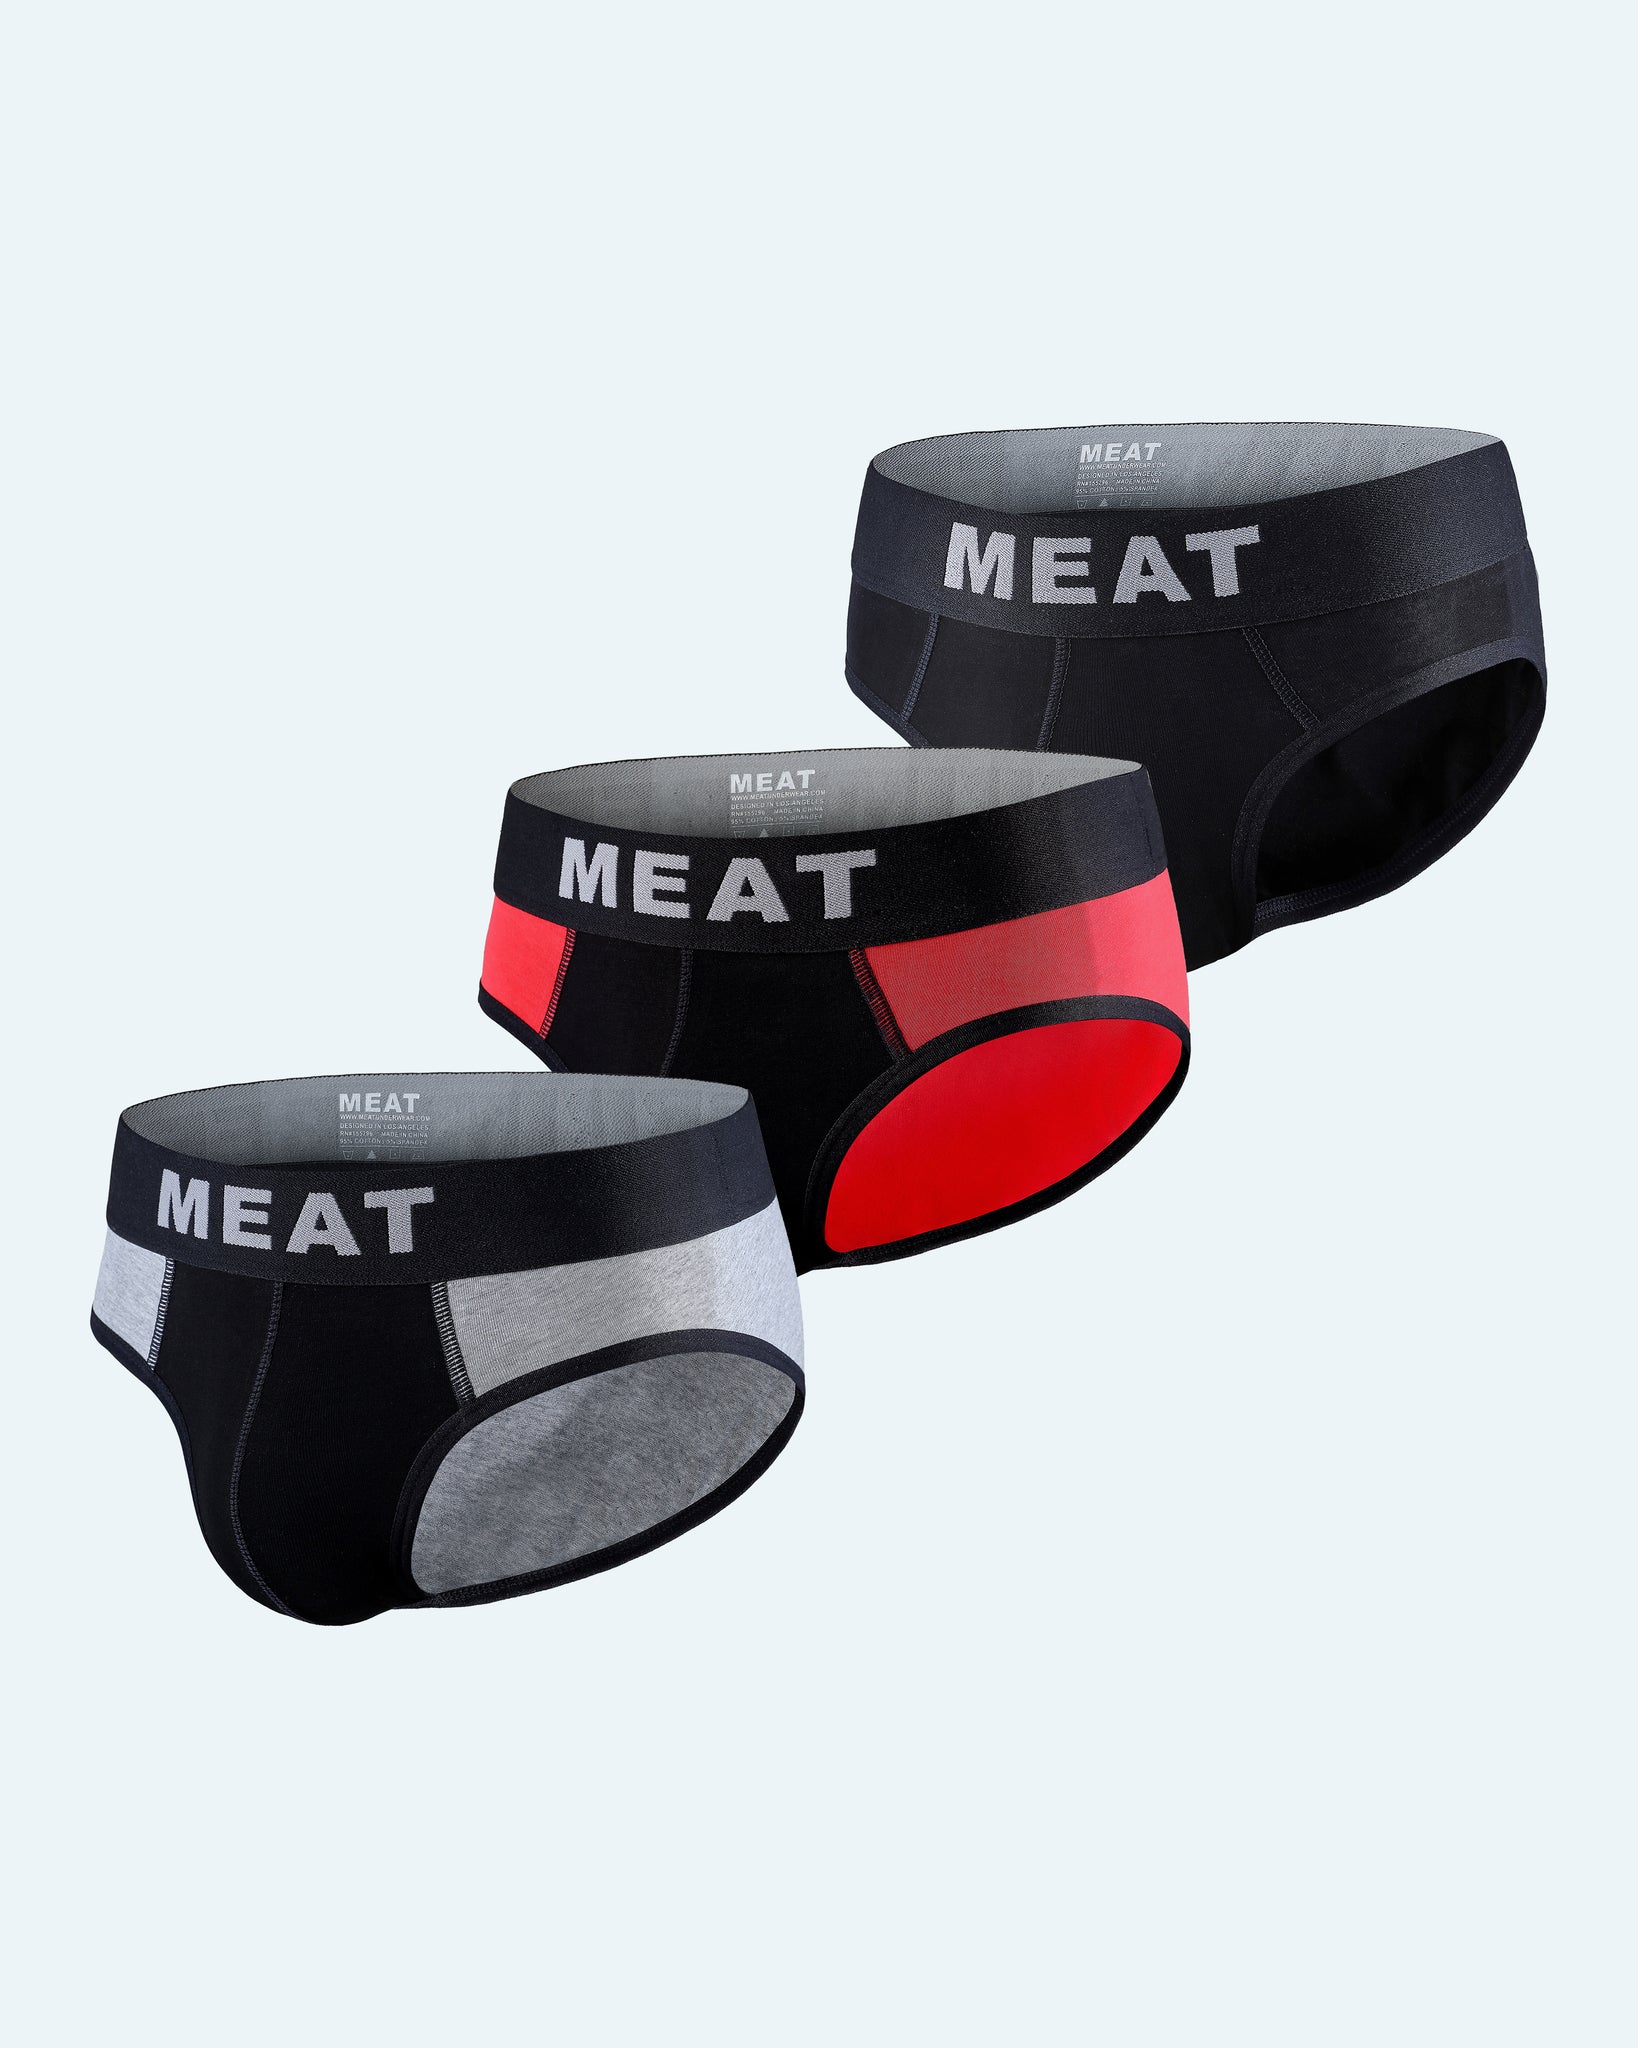 MEAT SPORTSCLUB - Intimate collection brief. Guaranteed to be the